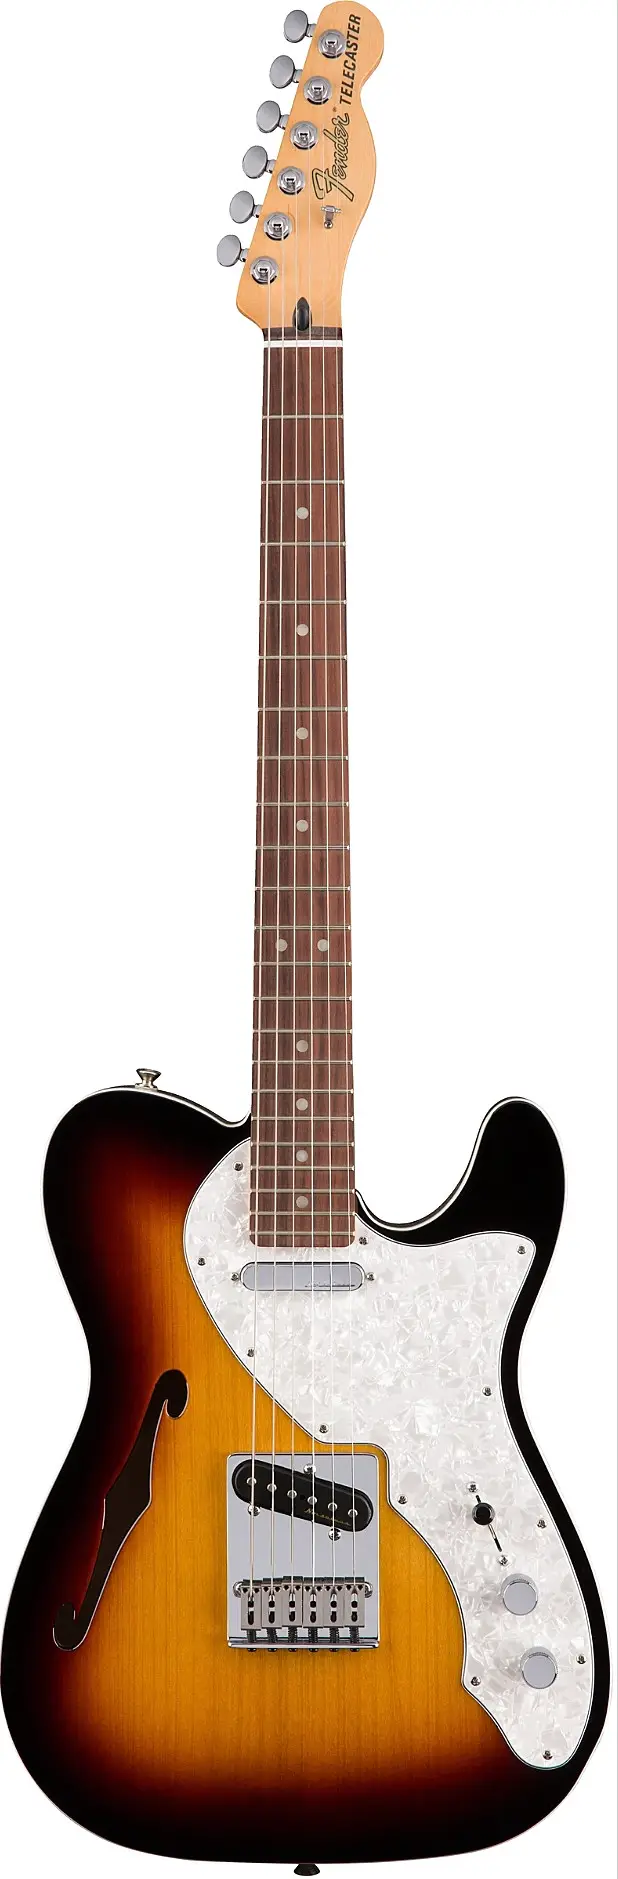 2017 Deluxe Telecaster Thinline by Fender